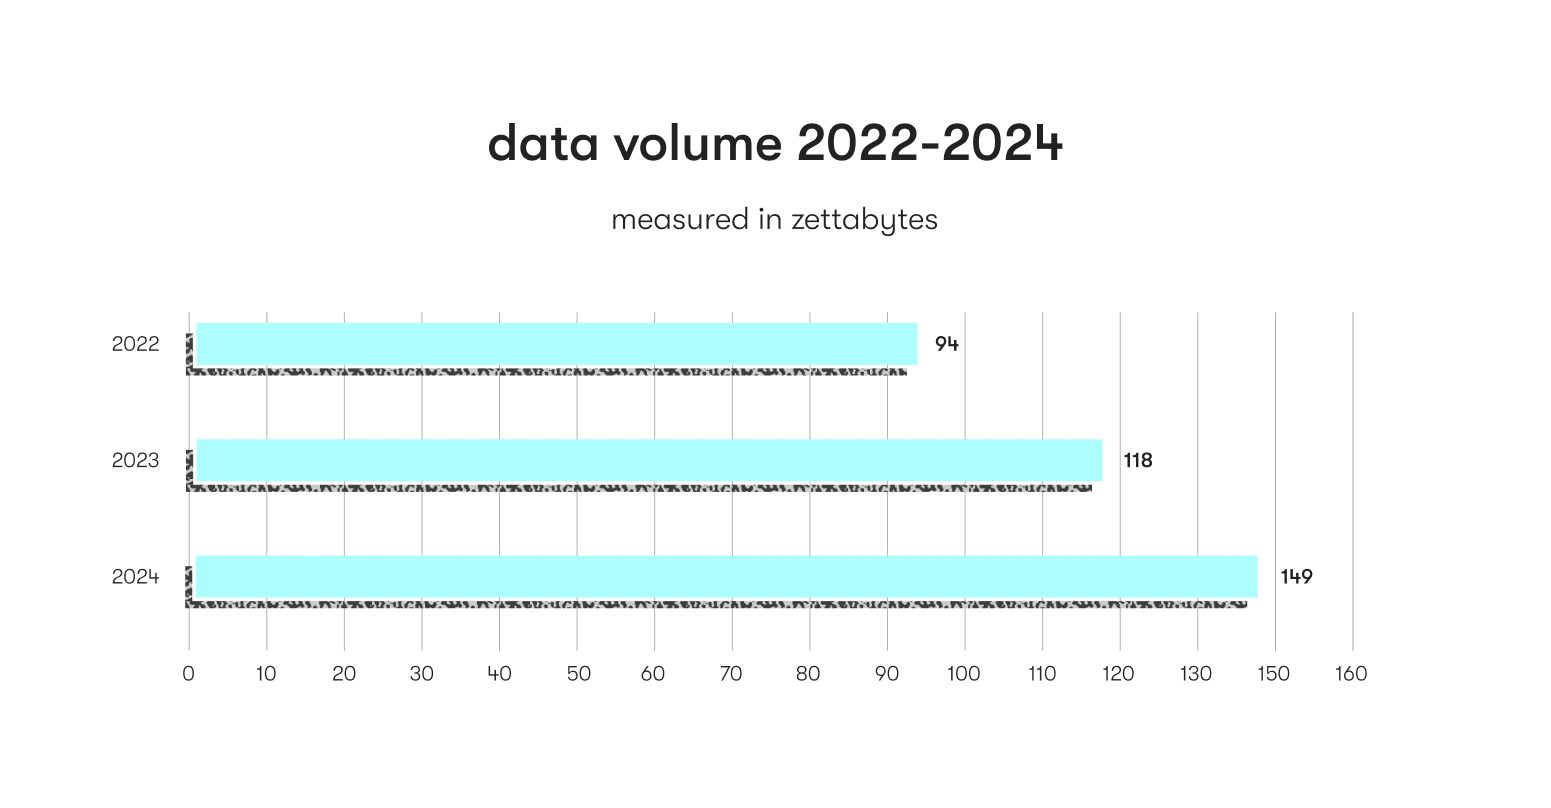 Retail Big Data volumes for 2022-2024